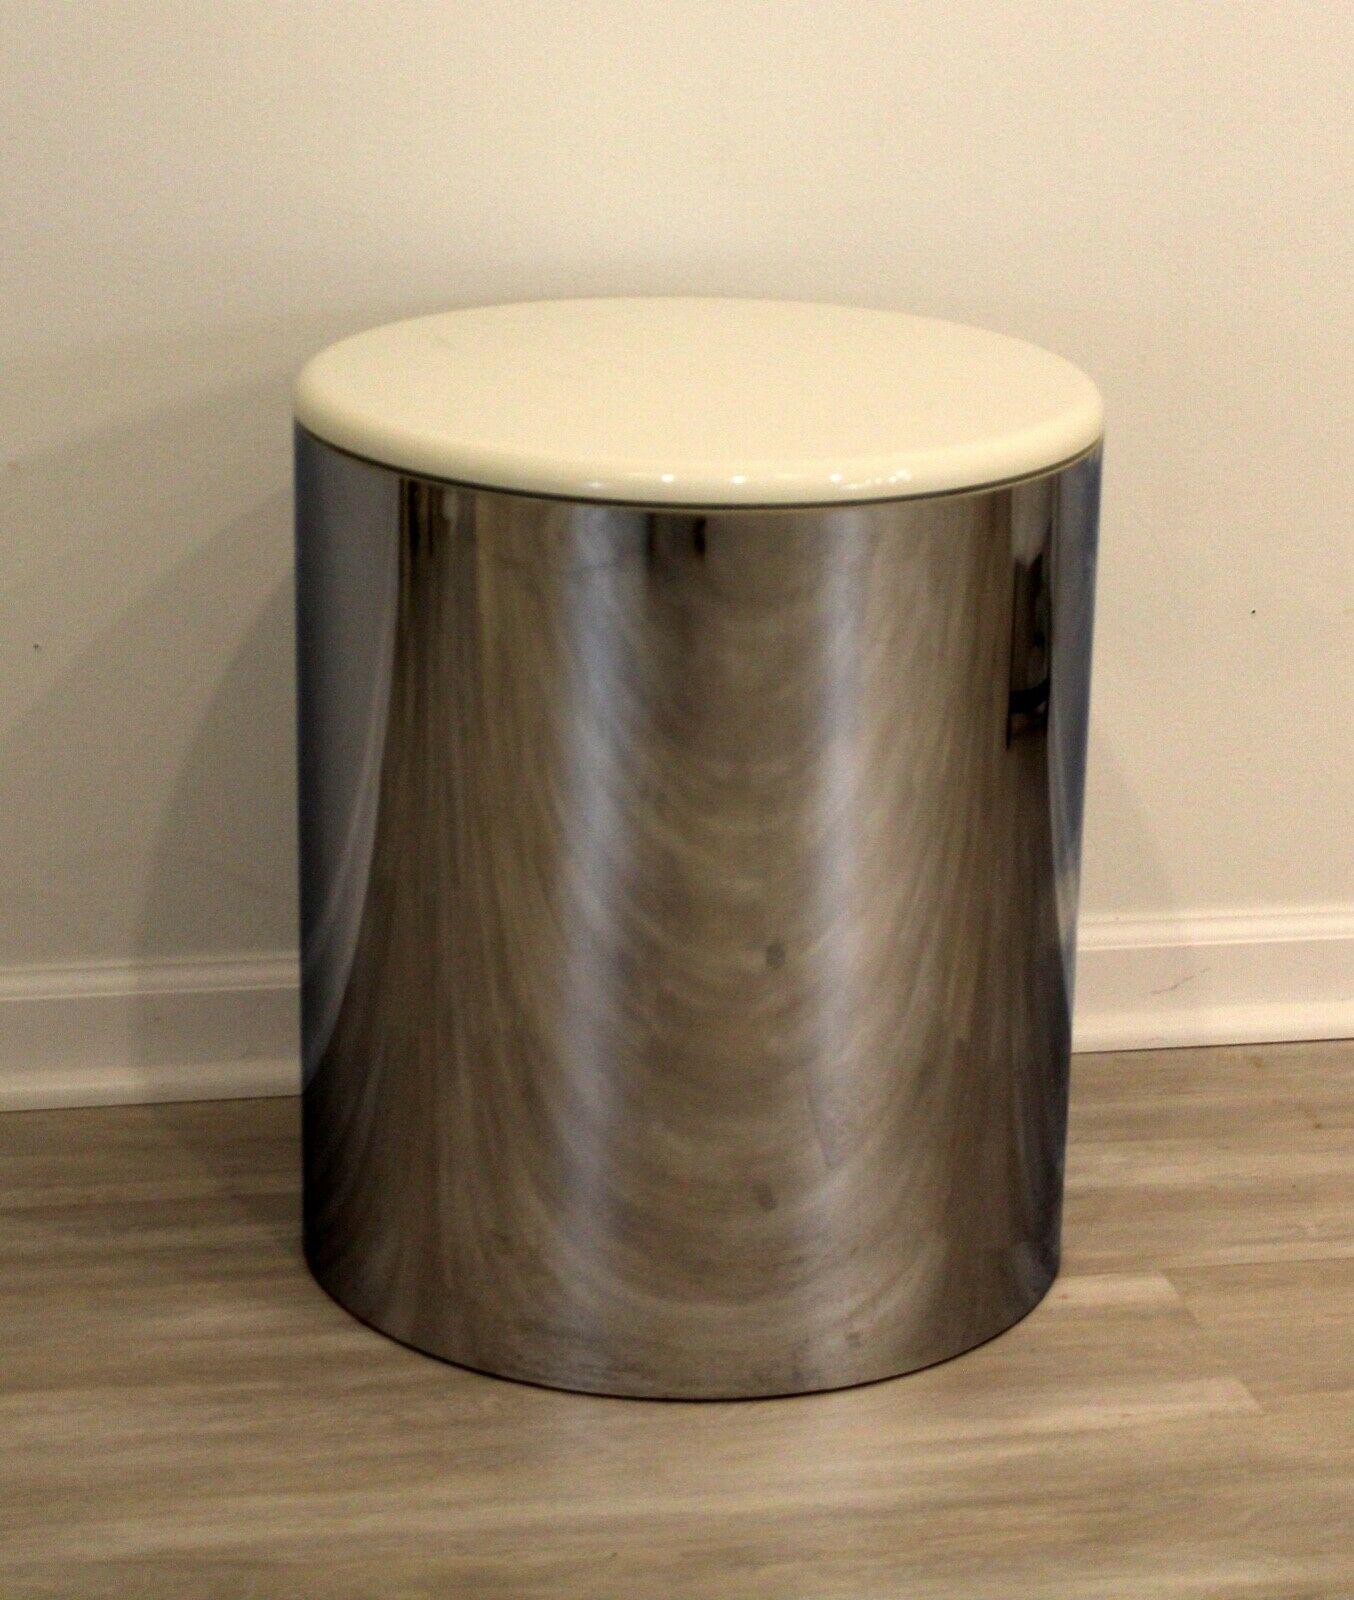 From Le Shoppe Too in Michigan, this sleek Postmodern side table by Paul Mayen has a polished chrome cylindrical base and a modern white lacquered top. Neutral enough to work with most modern interiors and sculptural enough as a stand alone piece.